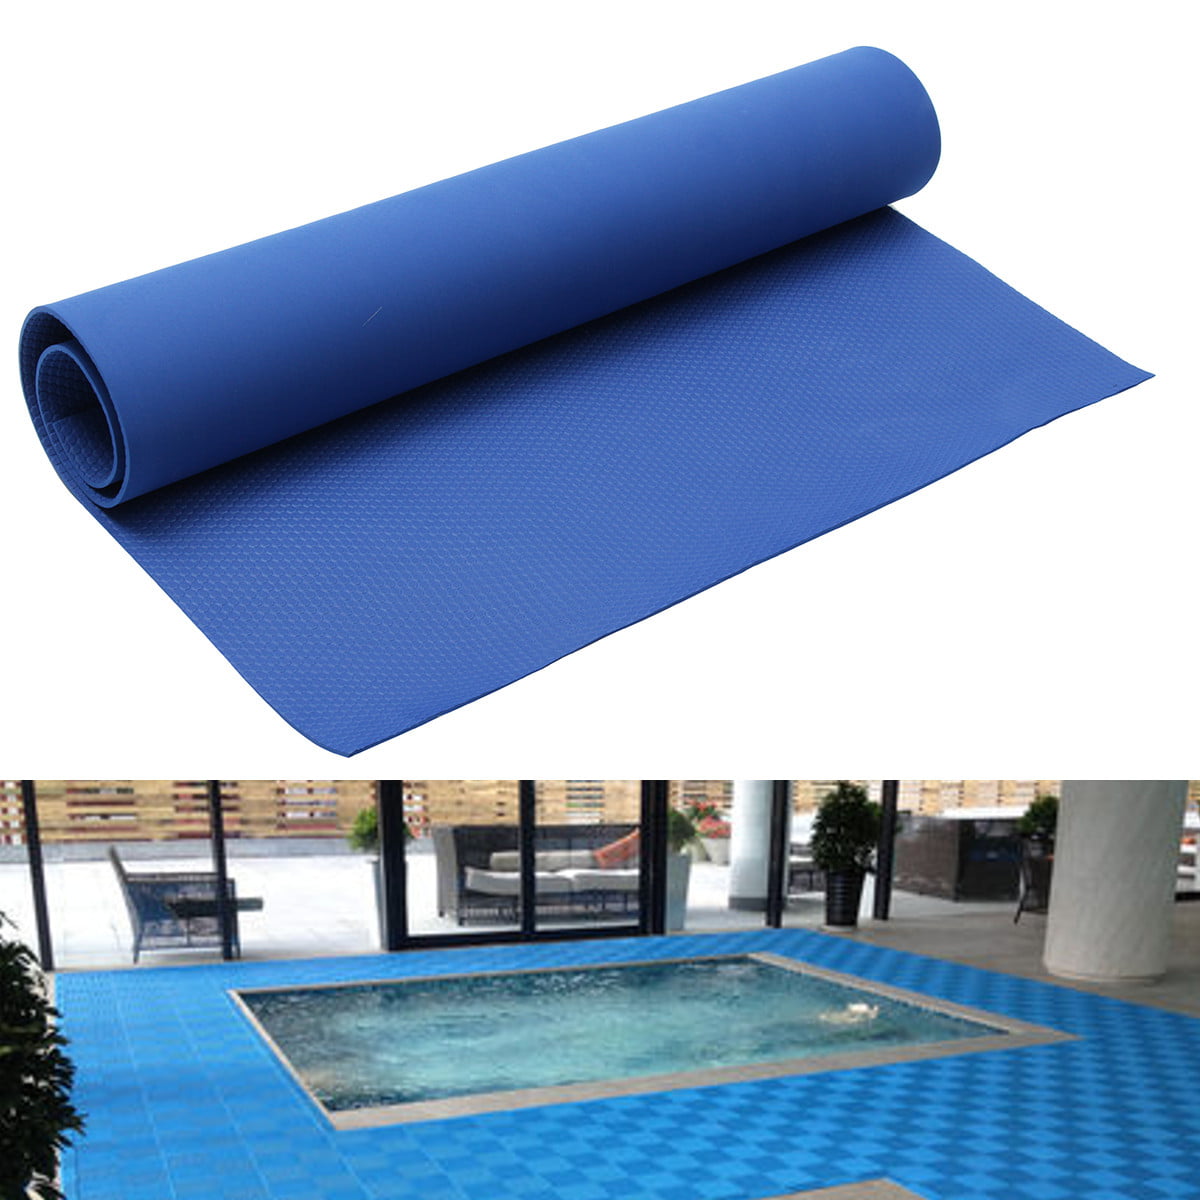 Swimming Pool Ladder Mat Protective Step Mat with Non-Slip Design for Protecting Vinyl Liner Pools from Wear Caused by Pool Ladder 24 x 36, Blue 